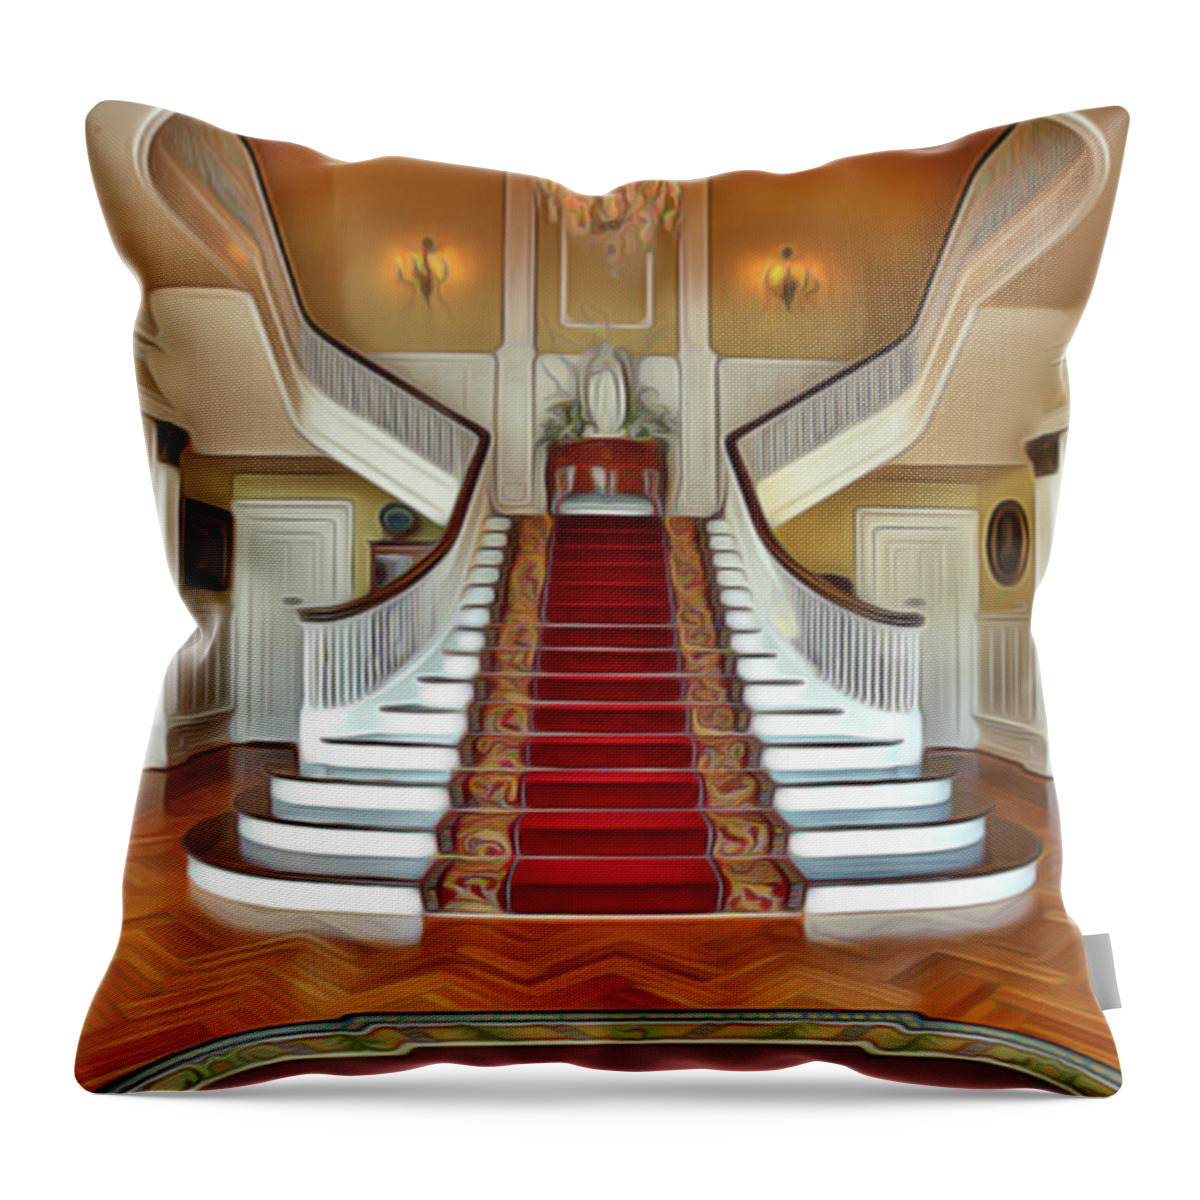 Governor's House Throw Pillow featuring the painting Governor's House by Harry Warrick